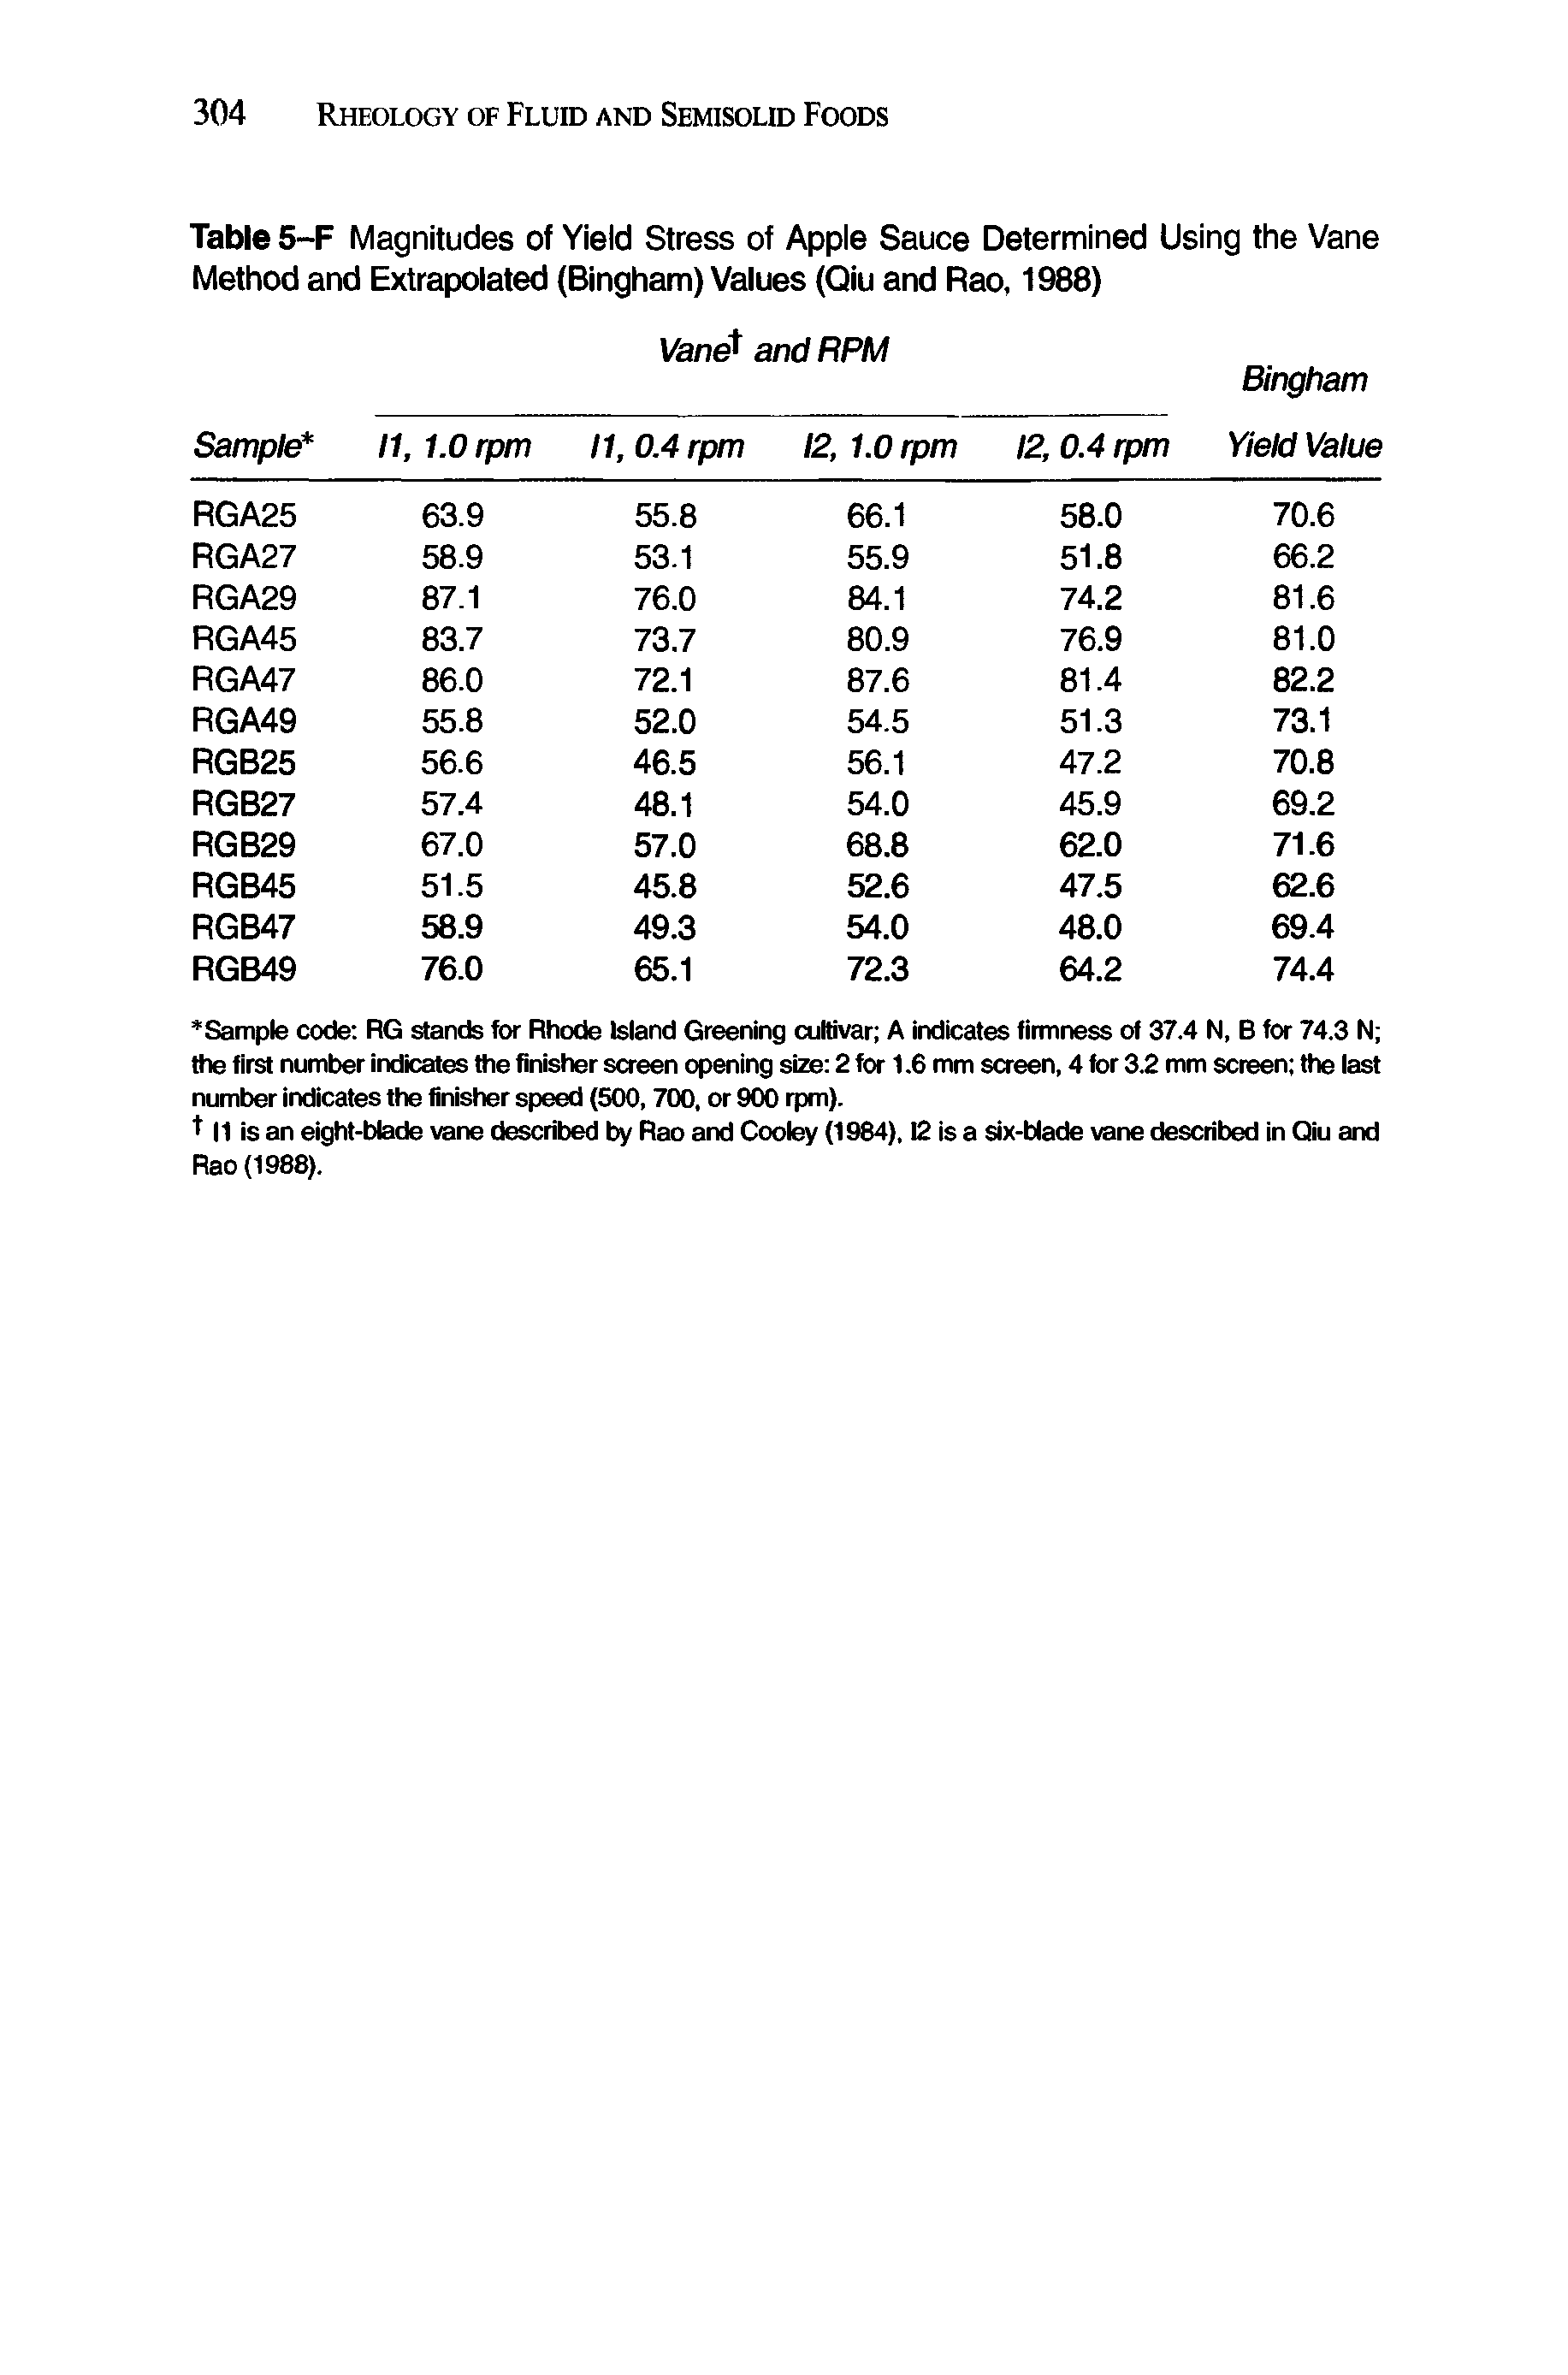 Table 5-F Magnitudes of Yield Stress of Apple Sauce Determined Using the Vane Method and Extrapolated (Bingham) Values (Qiu and Rao, 1988)...